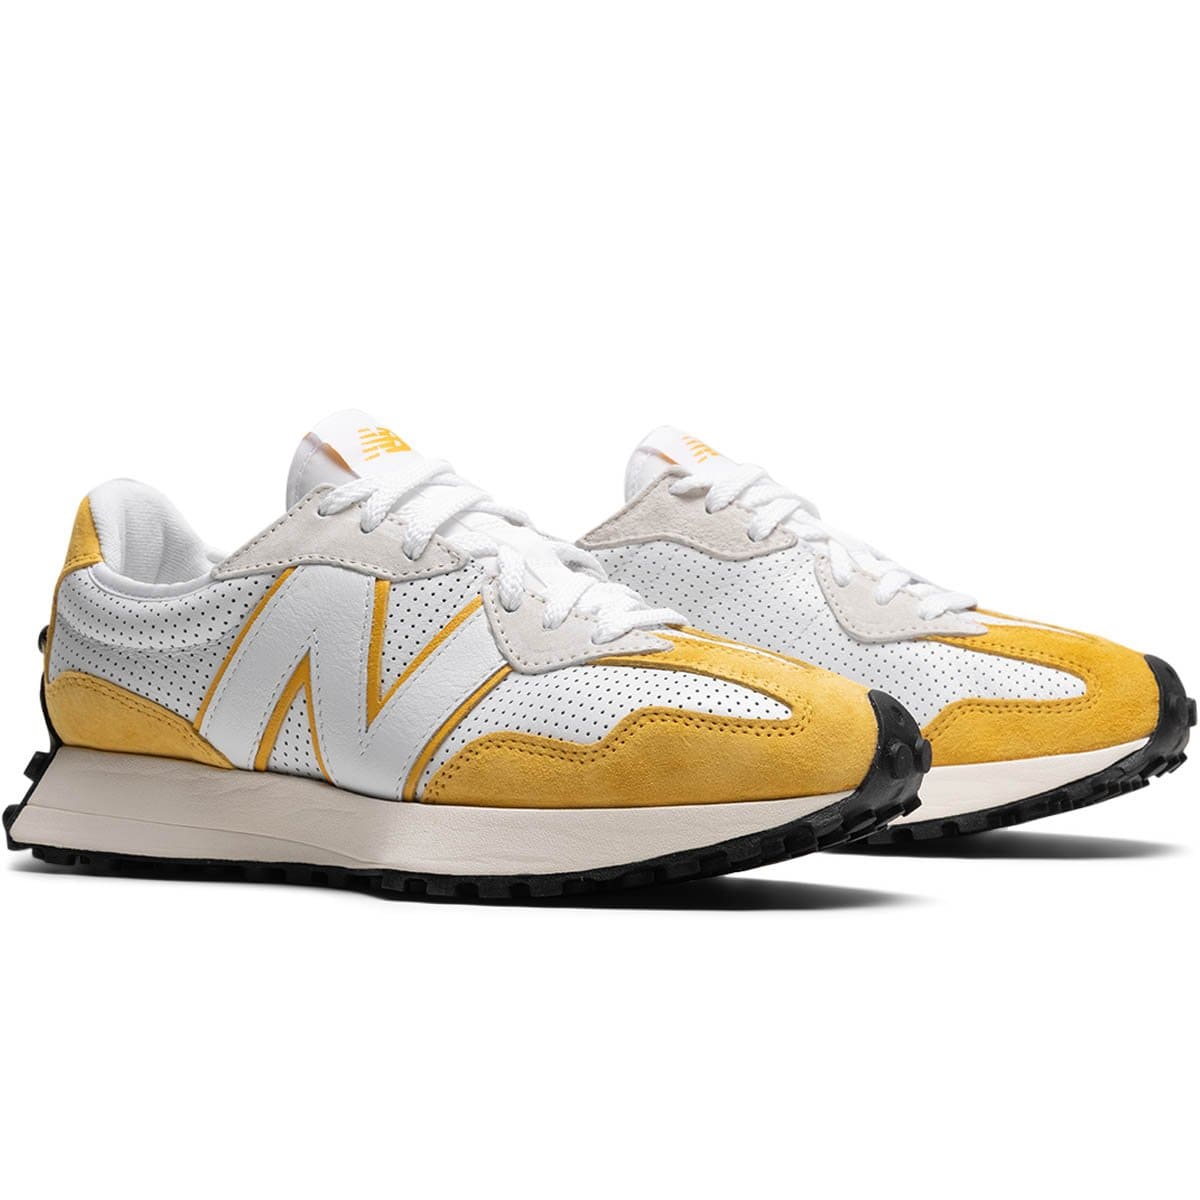 New Balance Shoes MS327PG